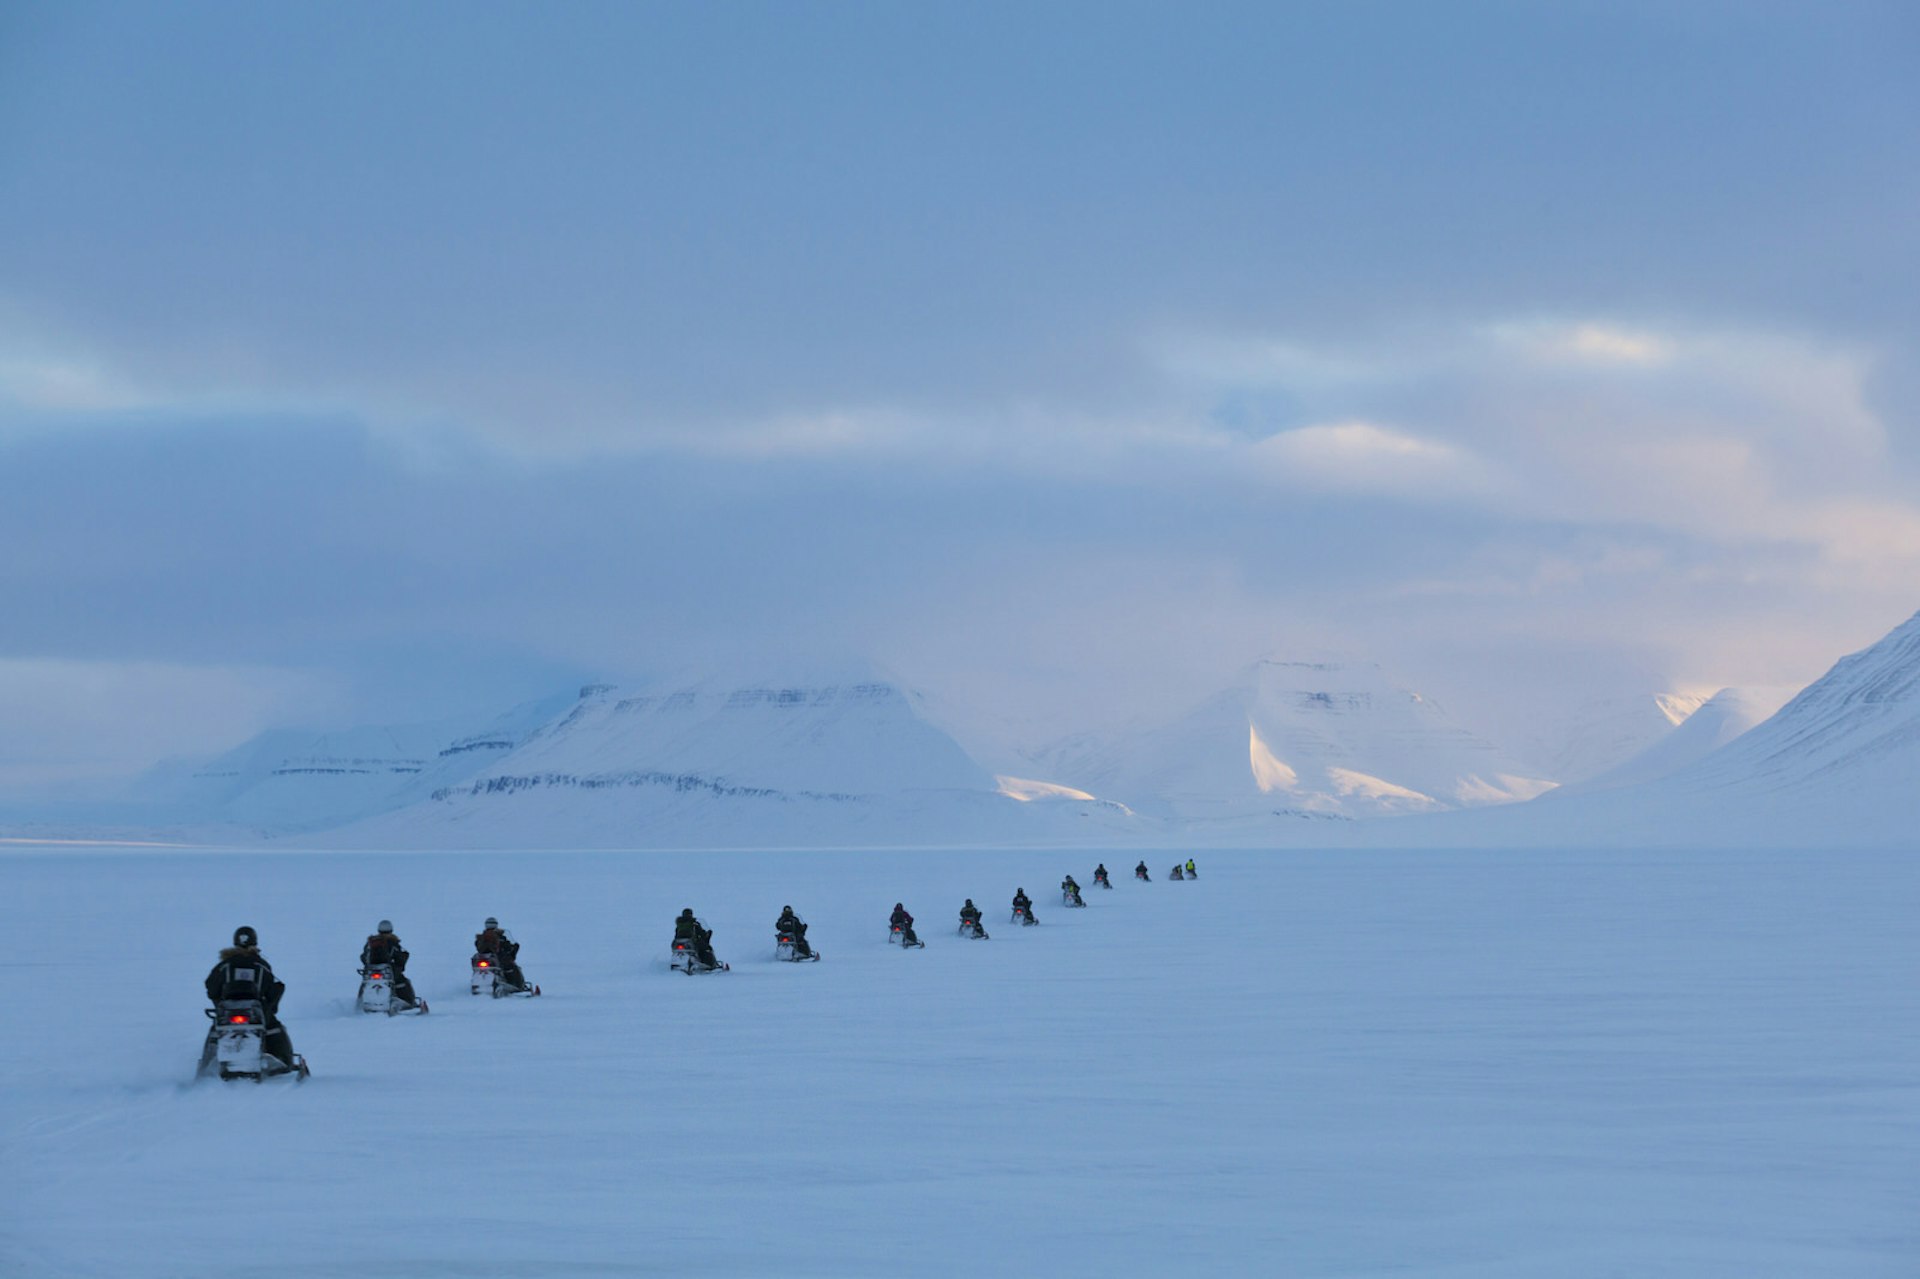 A group of people on snowmobiles exploring Svalbard © Ethan Welty / Getty Images